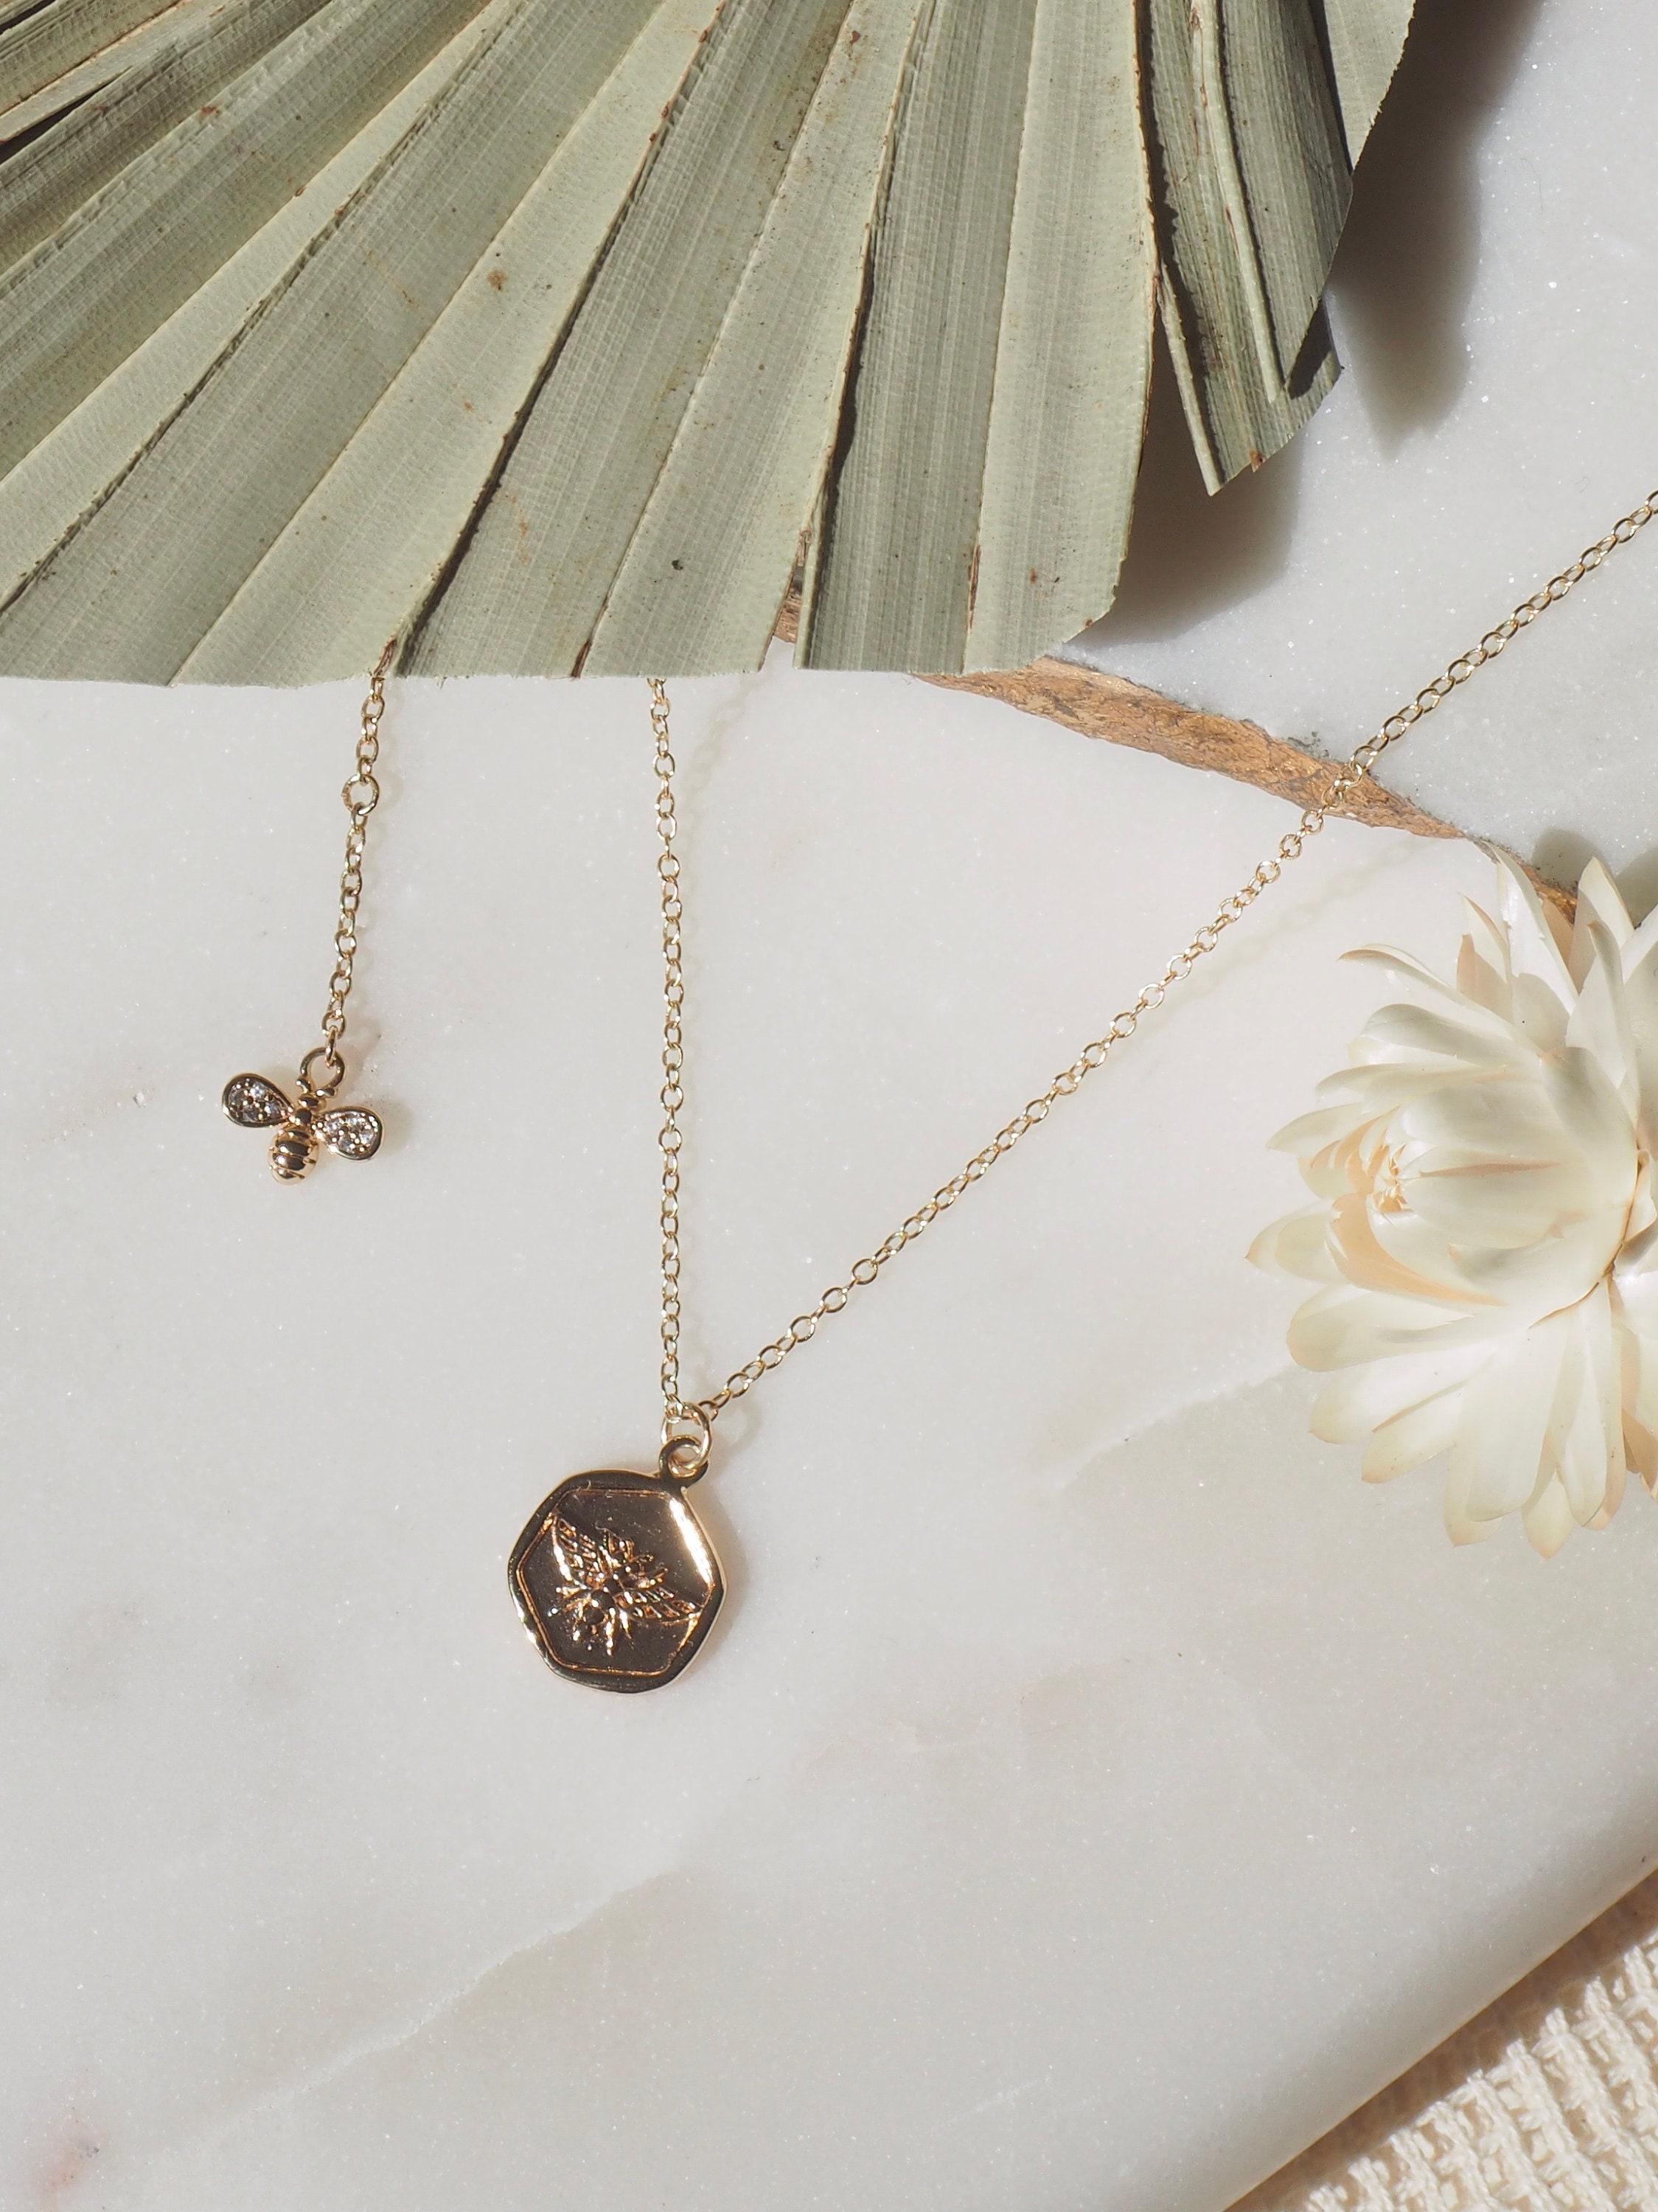 HONEY BEE YOURSELF Necklace Gold Plated Chain Necklace - Etsy